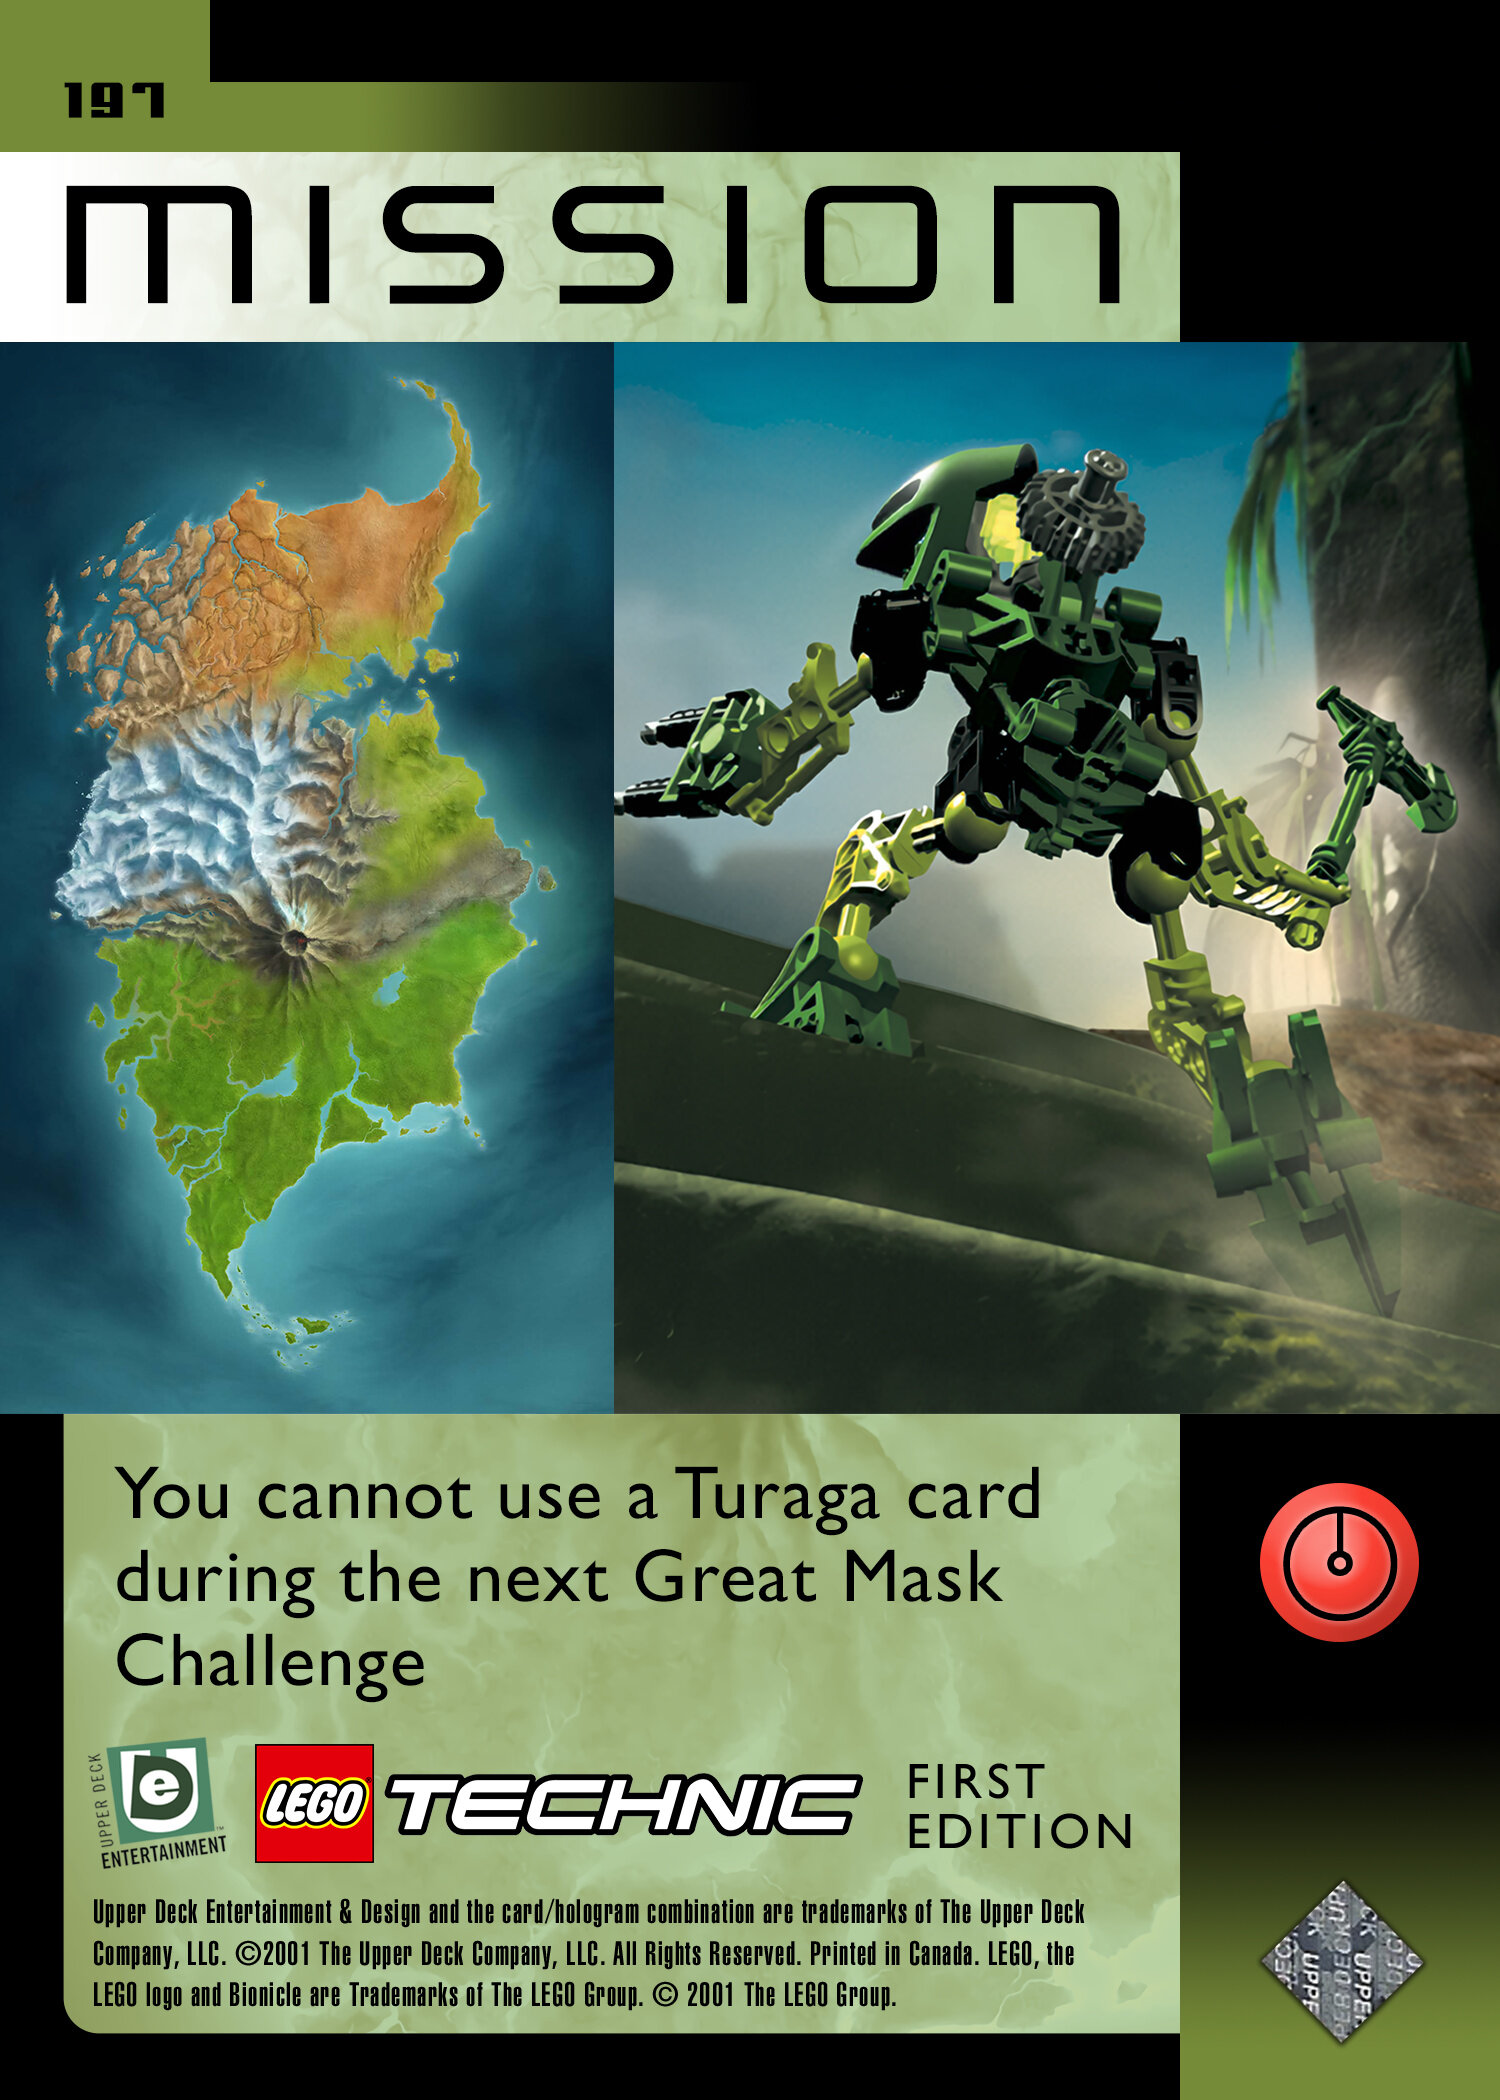 The Bionicle Tcg Topic A Bionicle Quest For The Masks Trading Card Game Discussion And Deck Tech Topic Bionicle The Ttv Message Boards - roblox trading cards